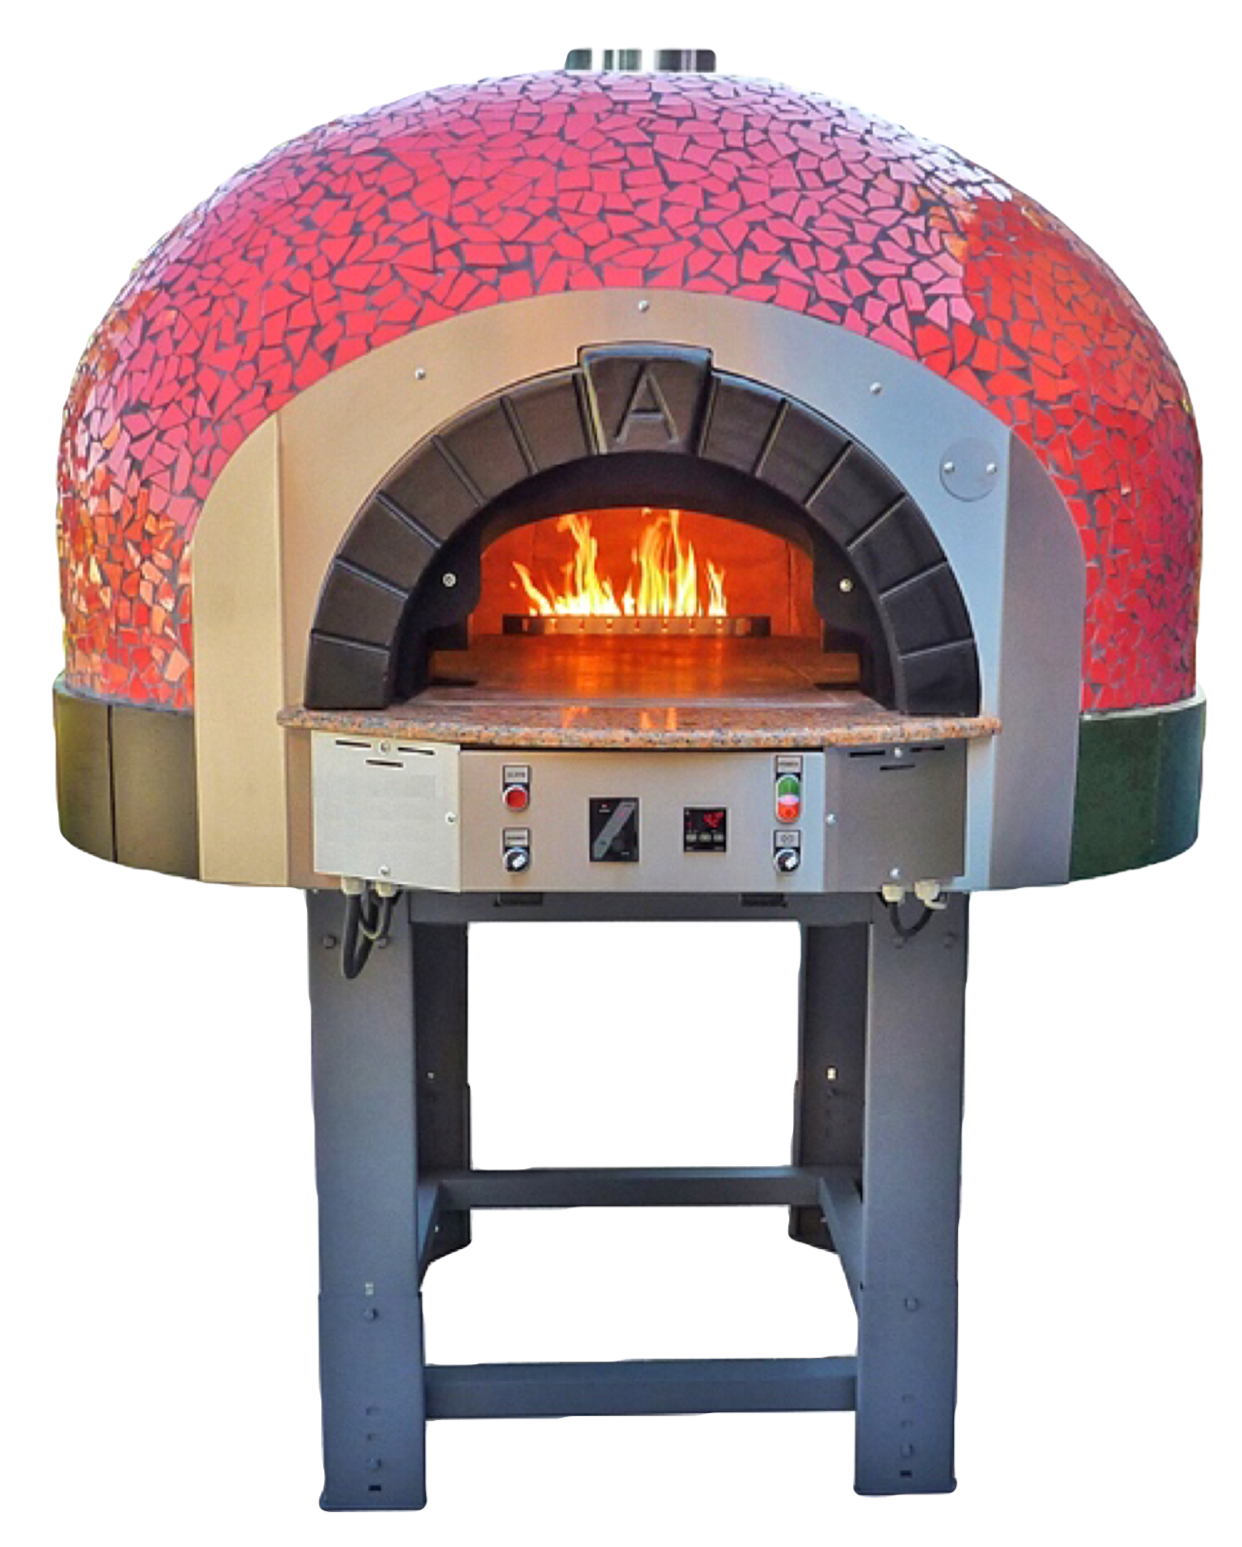 Pizza ovens commercial mobile. Oven clipart bread oven